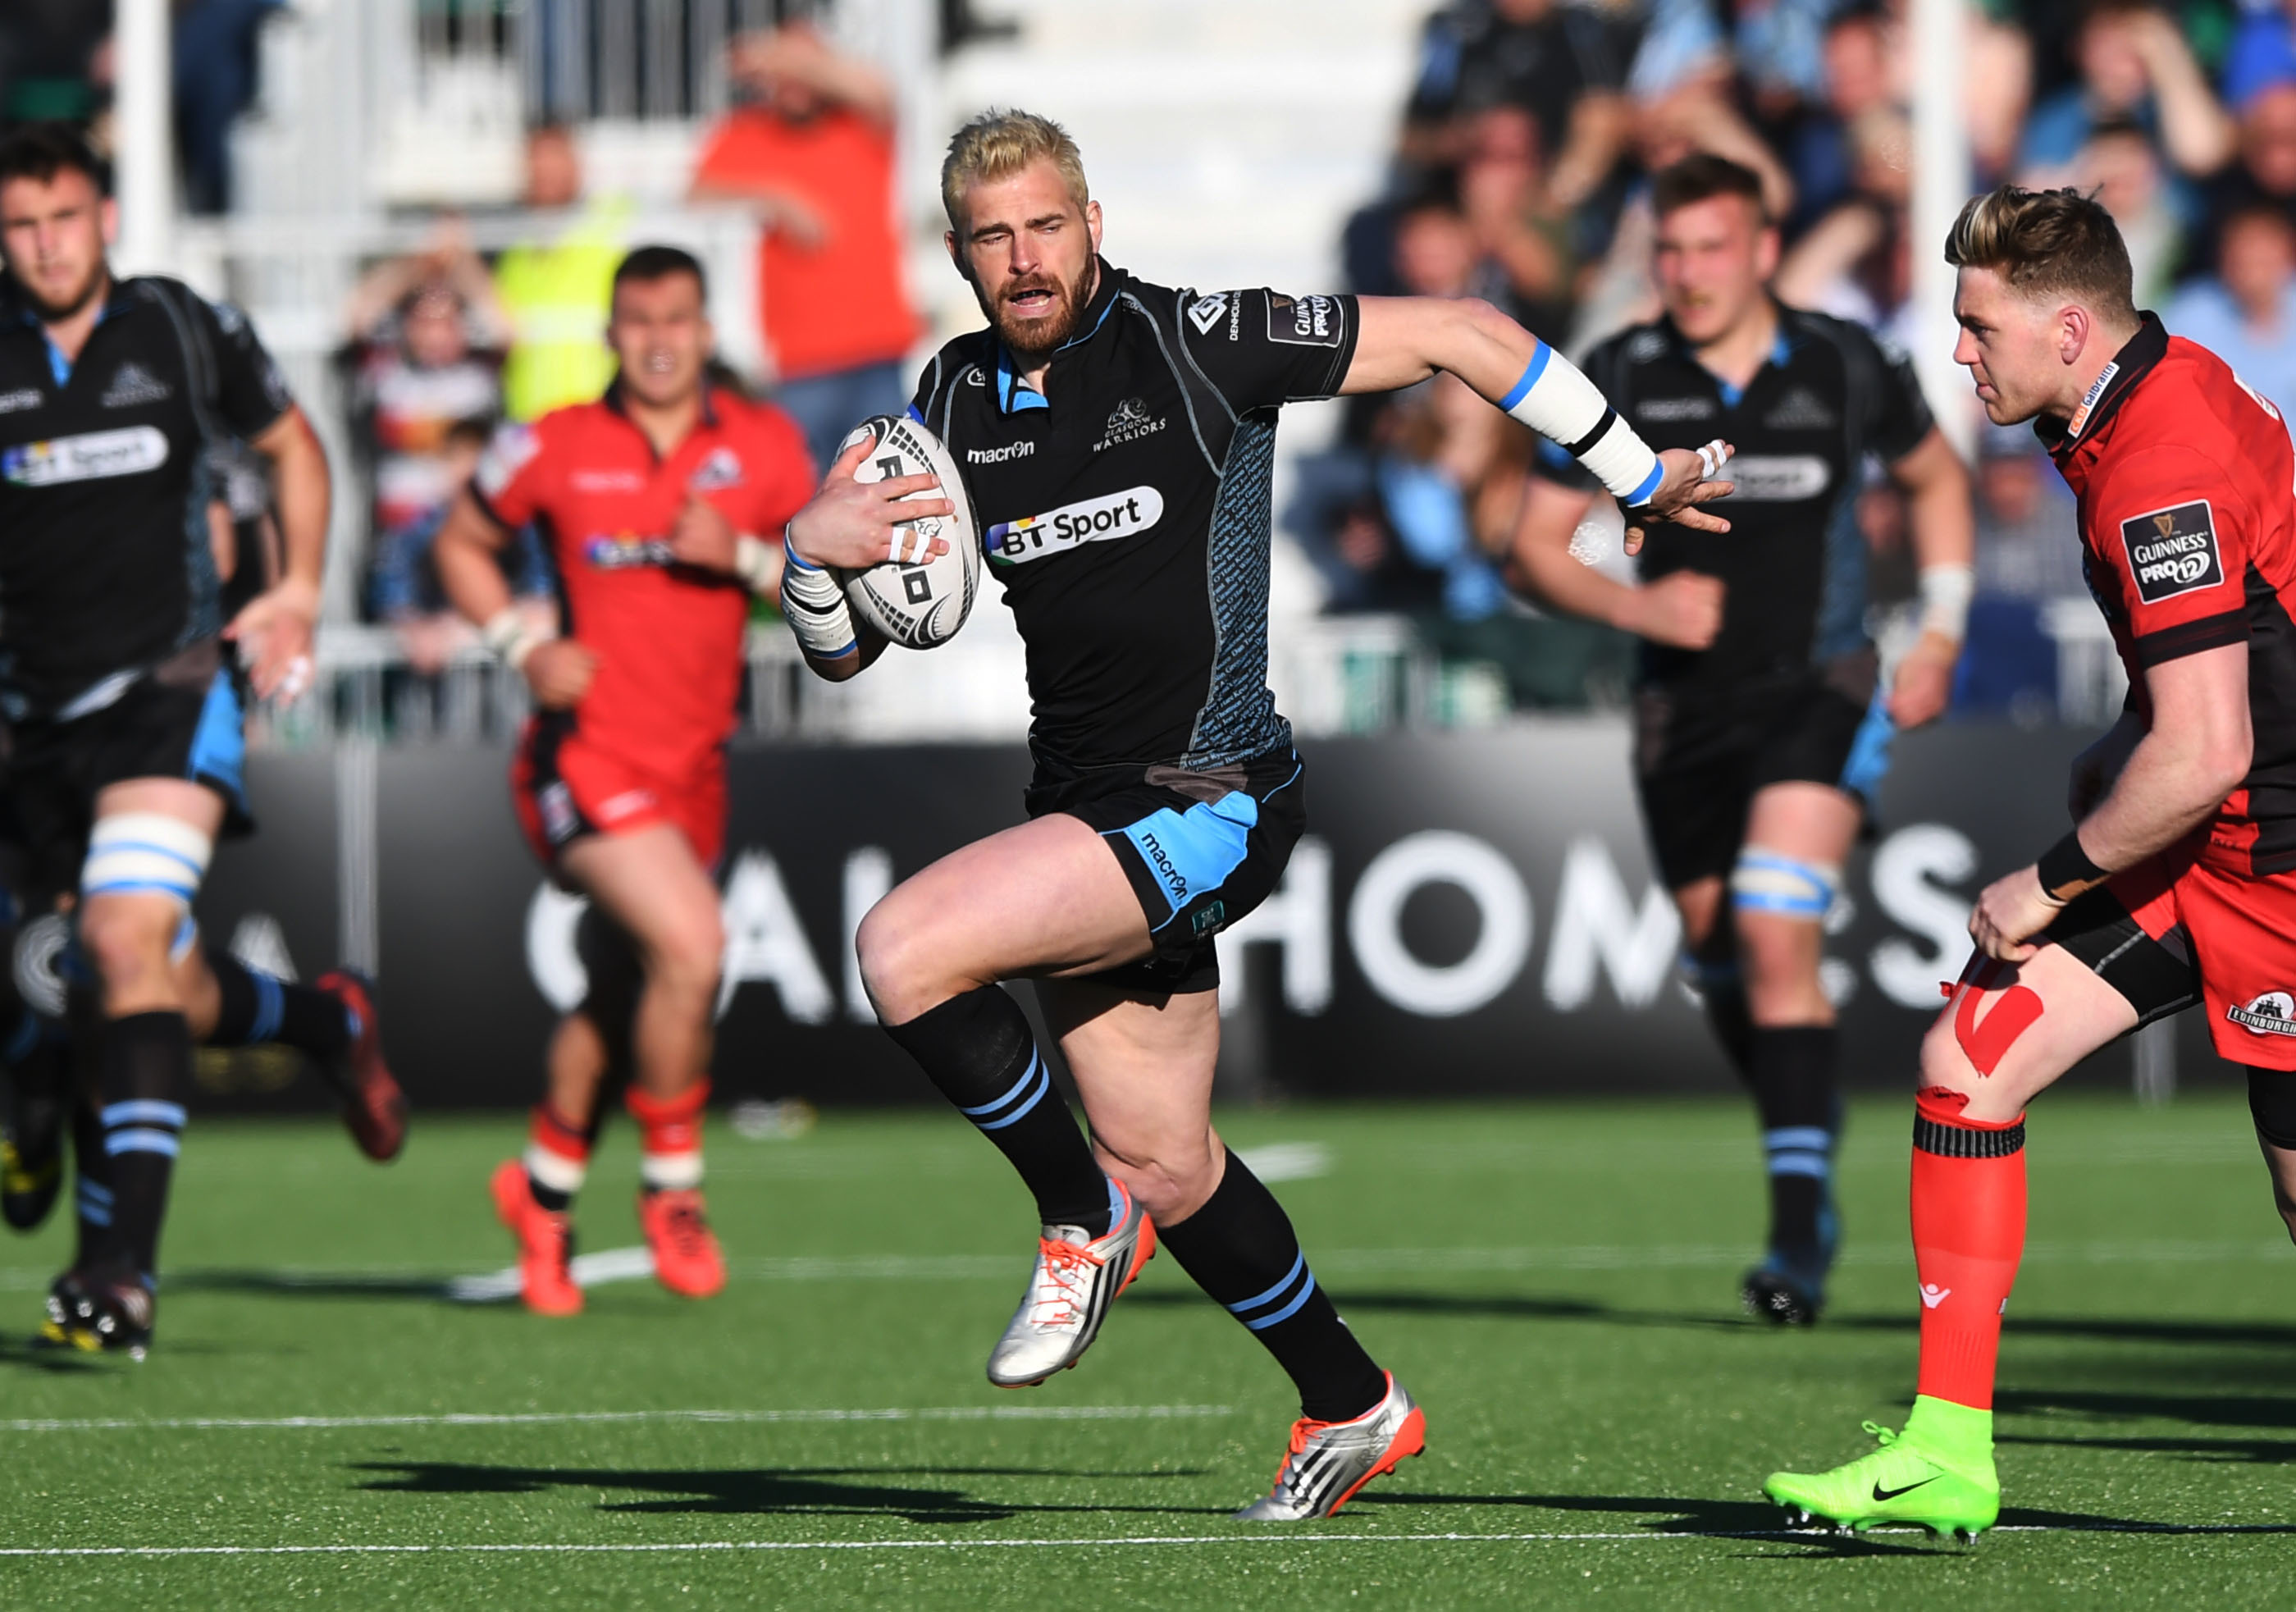 Sean Lamont at full pace in his final game at Scotstoun.